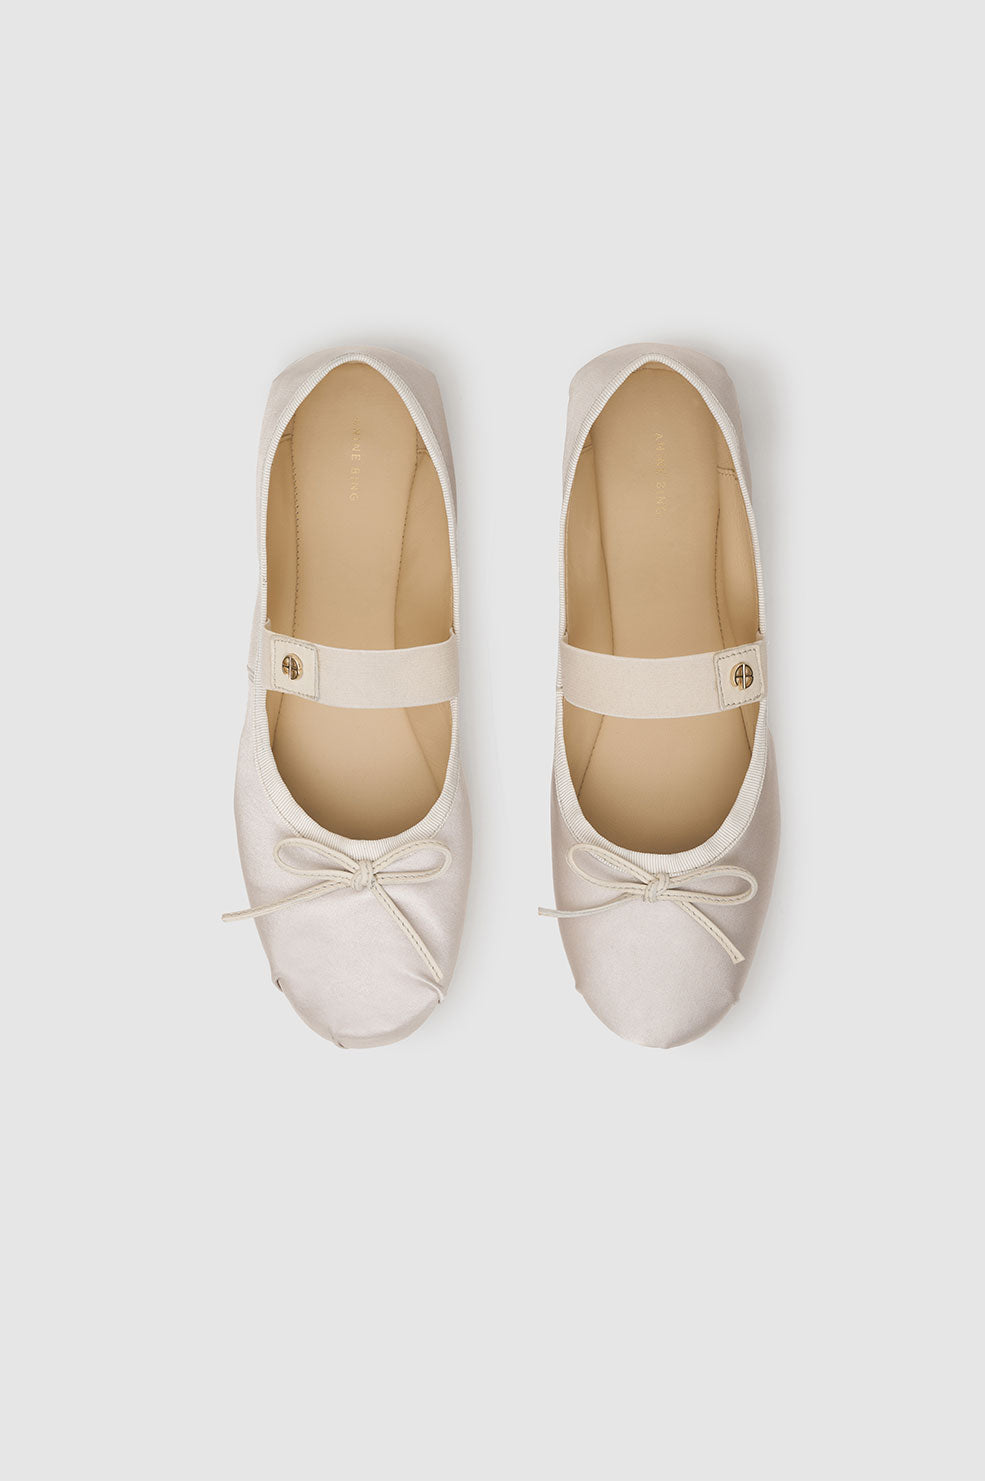 ANINE BING Jolie Flats - Champagne - Top Pair View